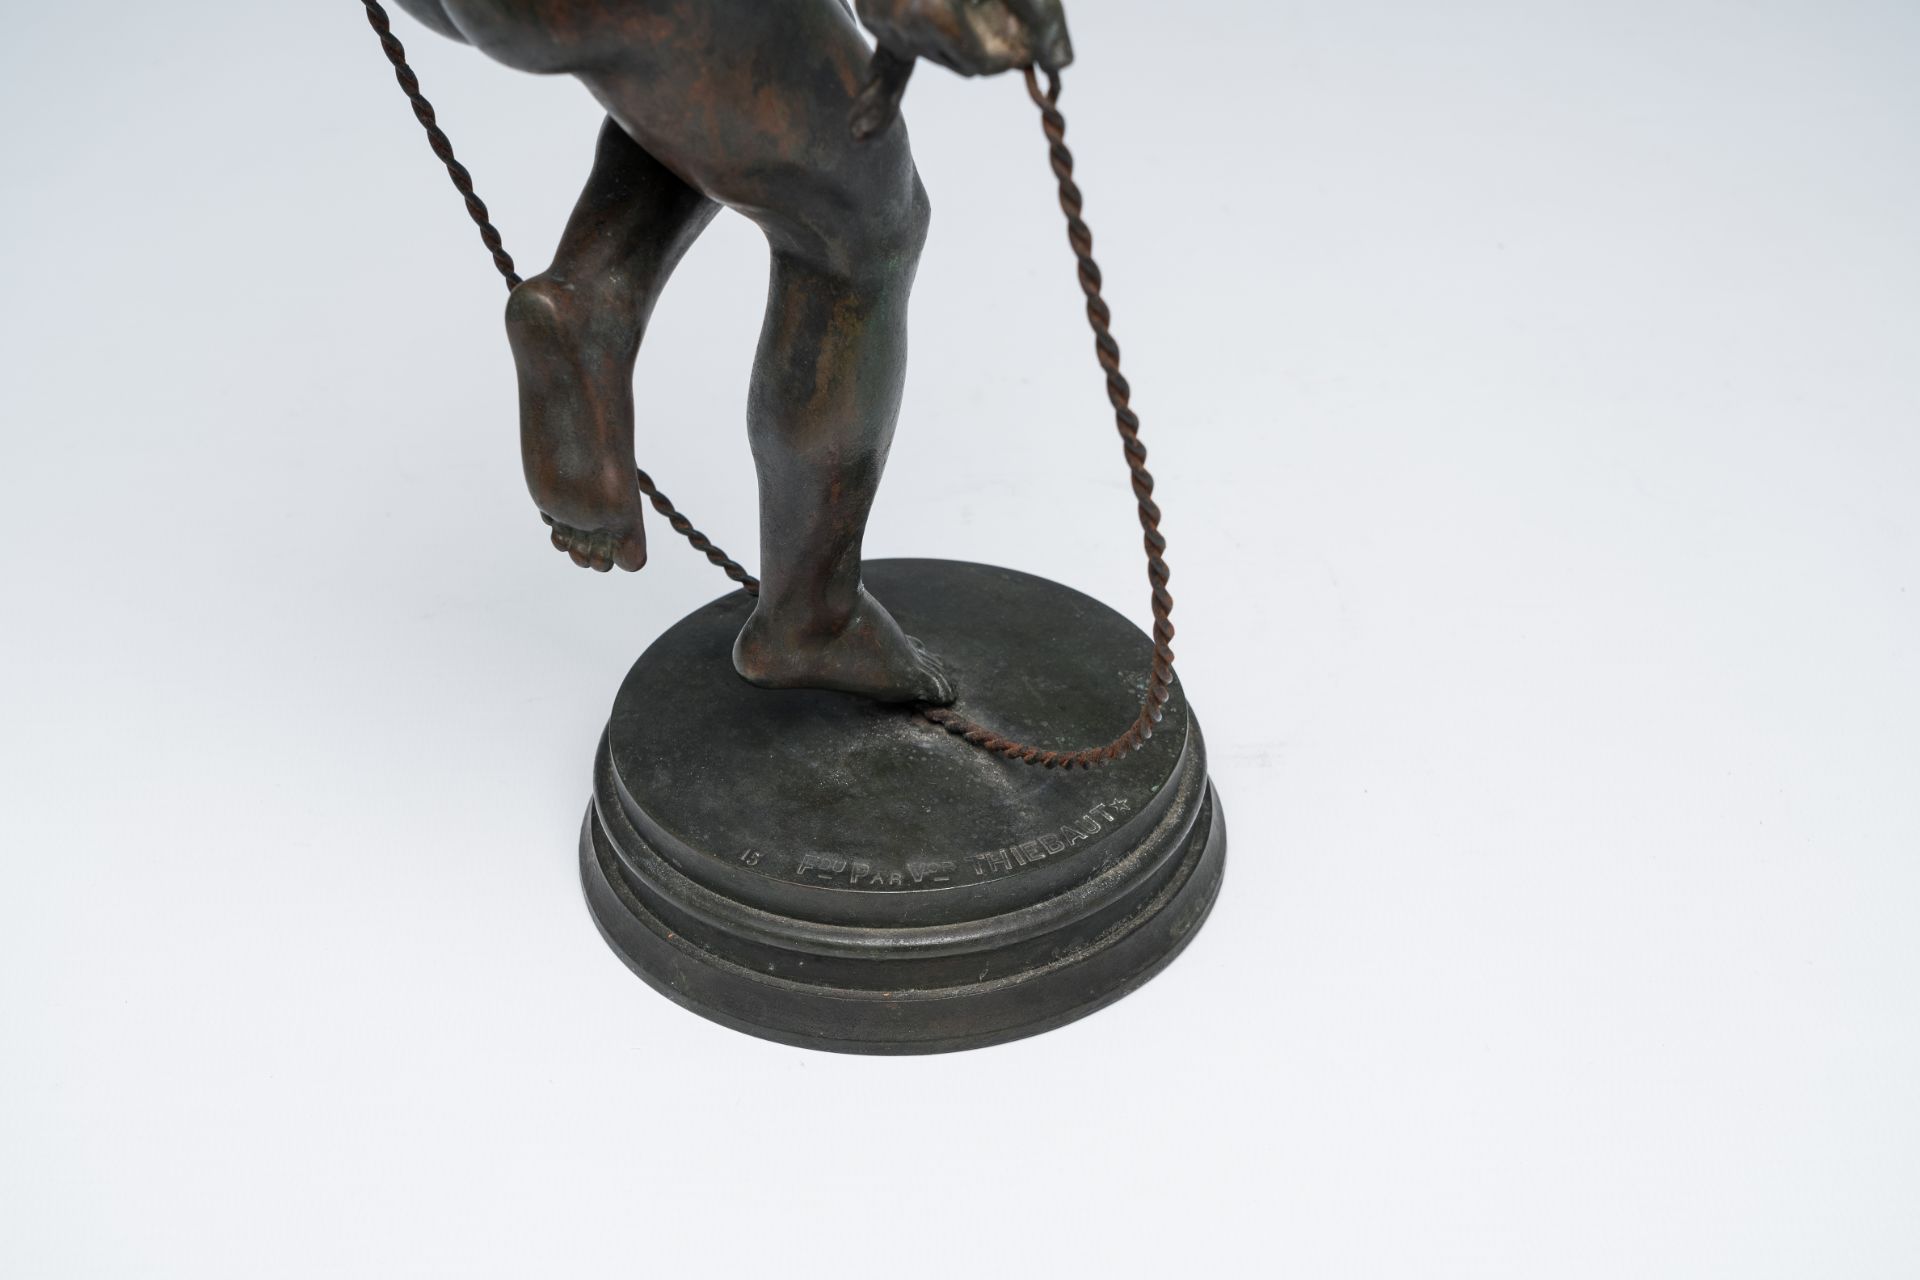 Augustin Courtet (1821-1891): A faun jumping rope, patinated bronze - Image 9 of 9